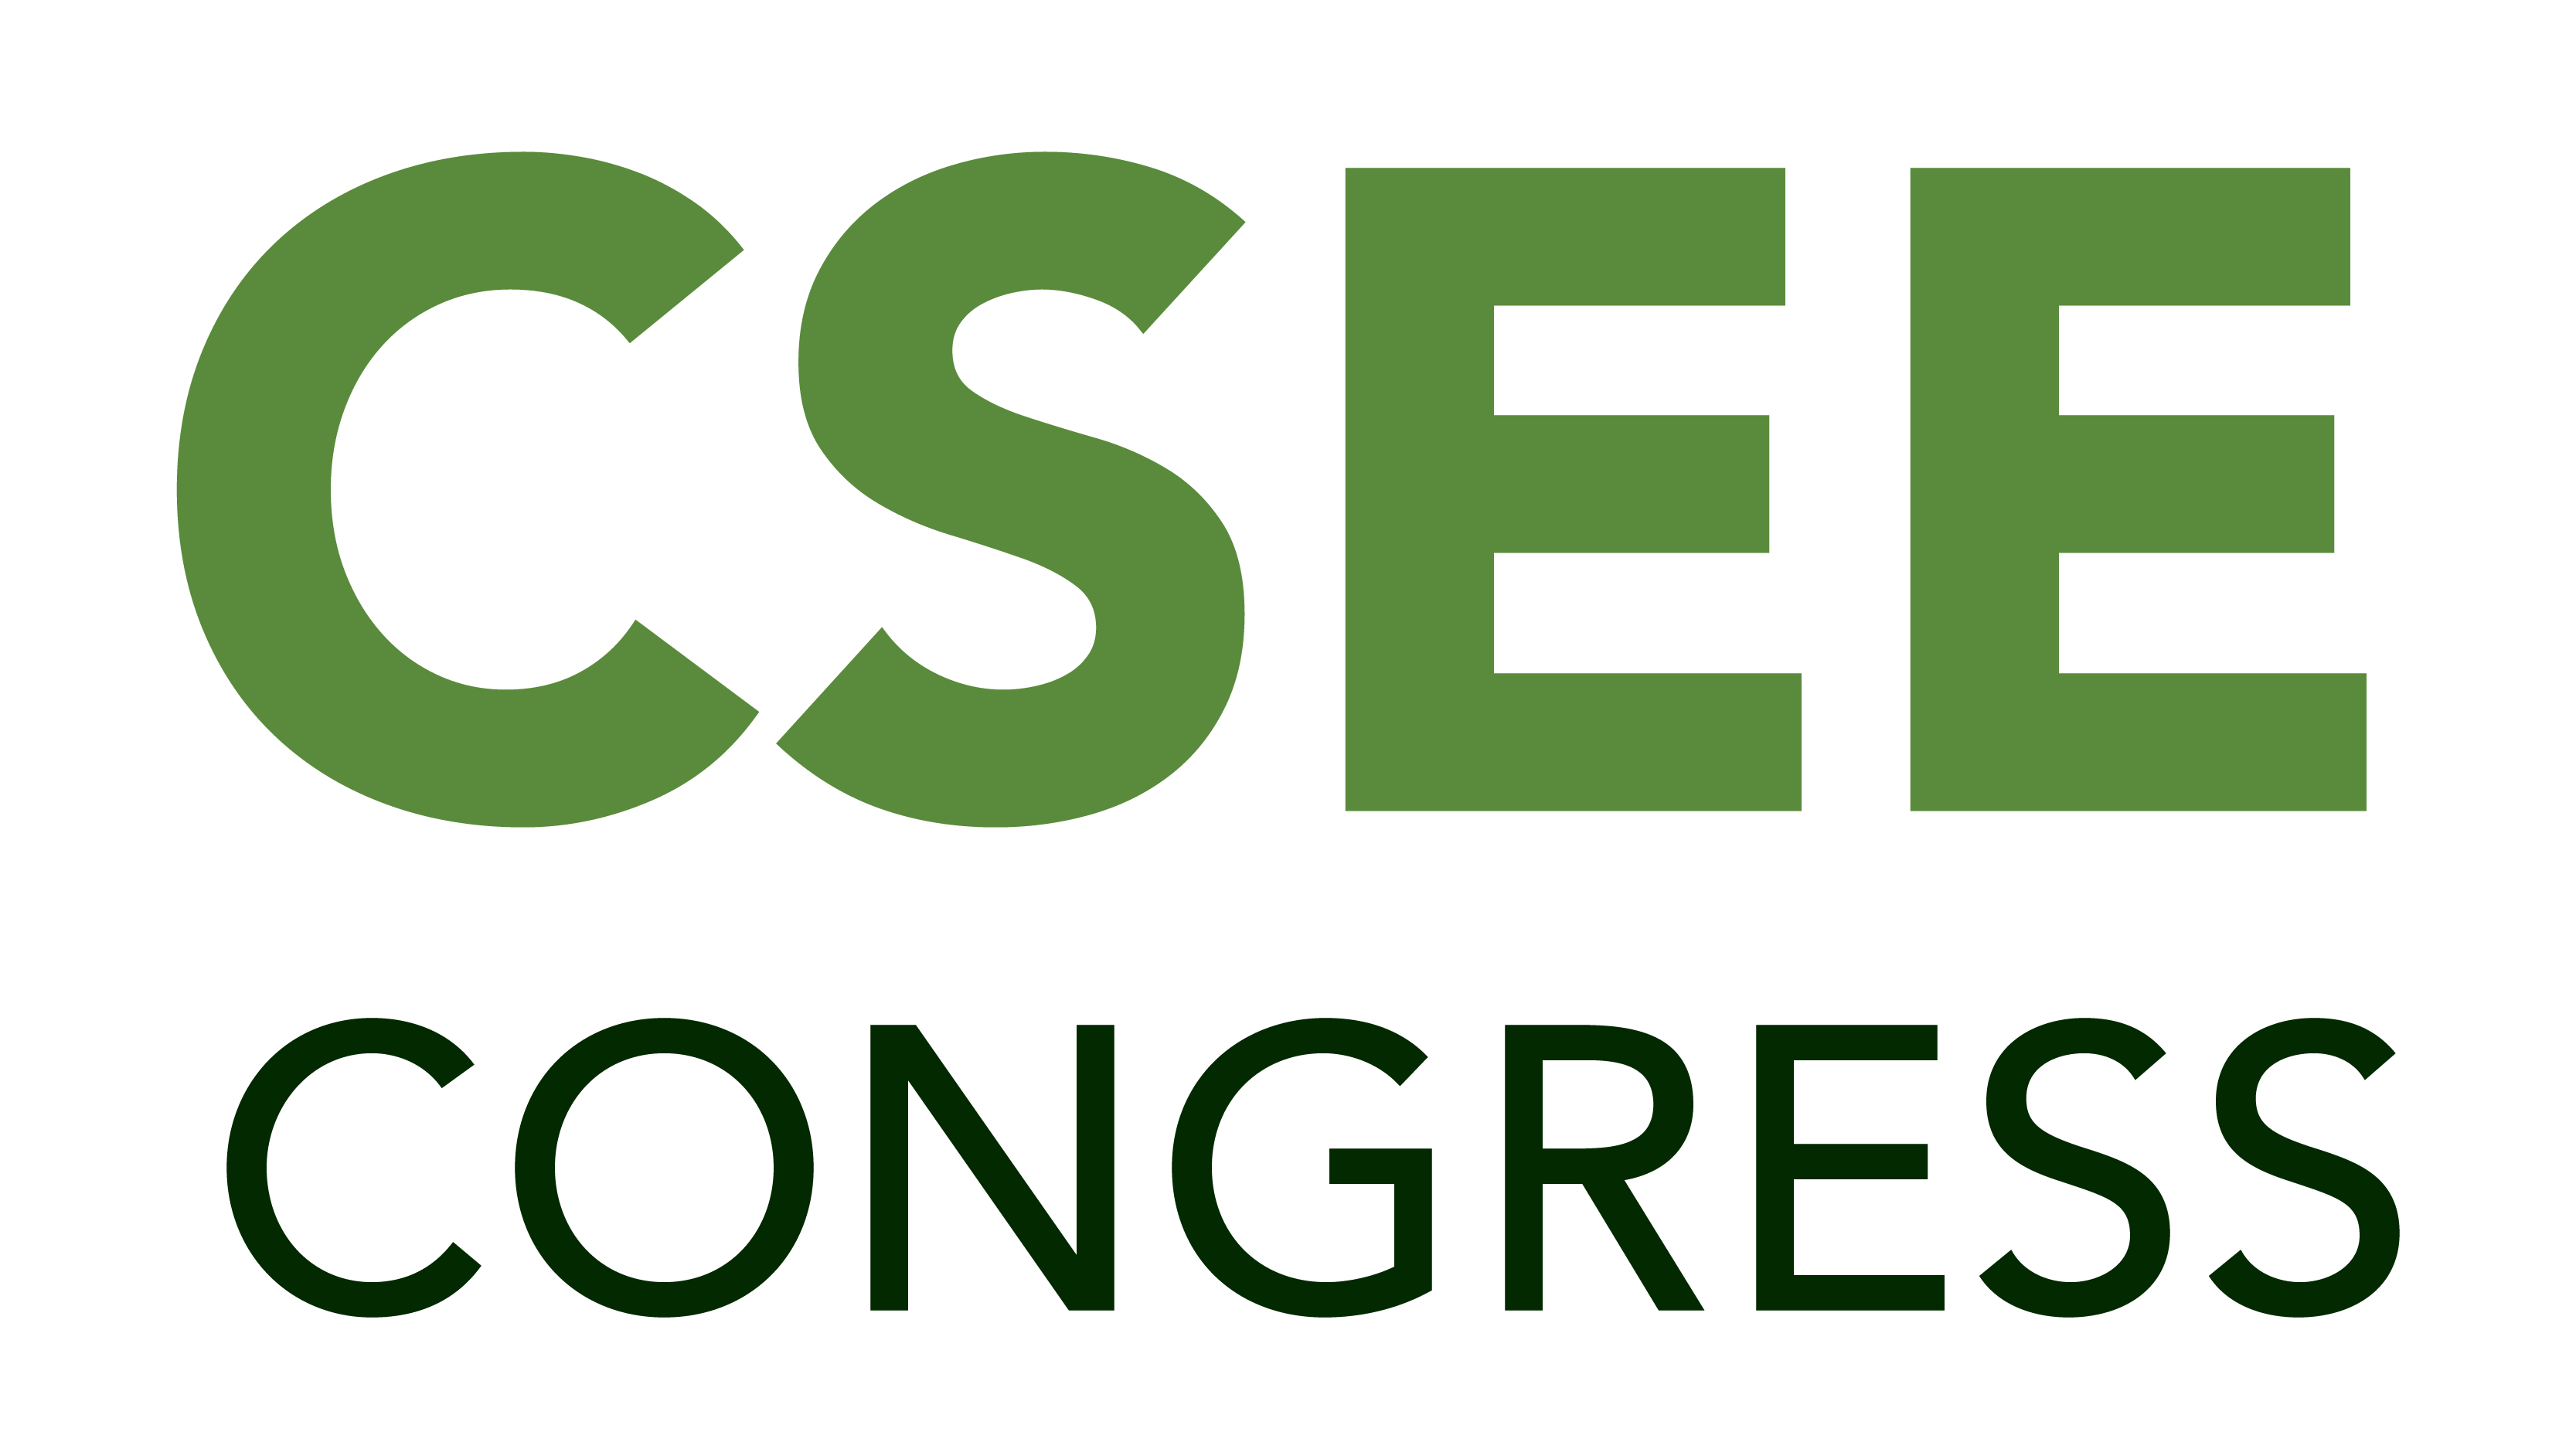 8th World Congress on Civil, Structural, and Environmental Engineering, Lisbon, Portugal, March 29 - 31, 2023